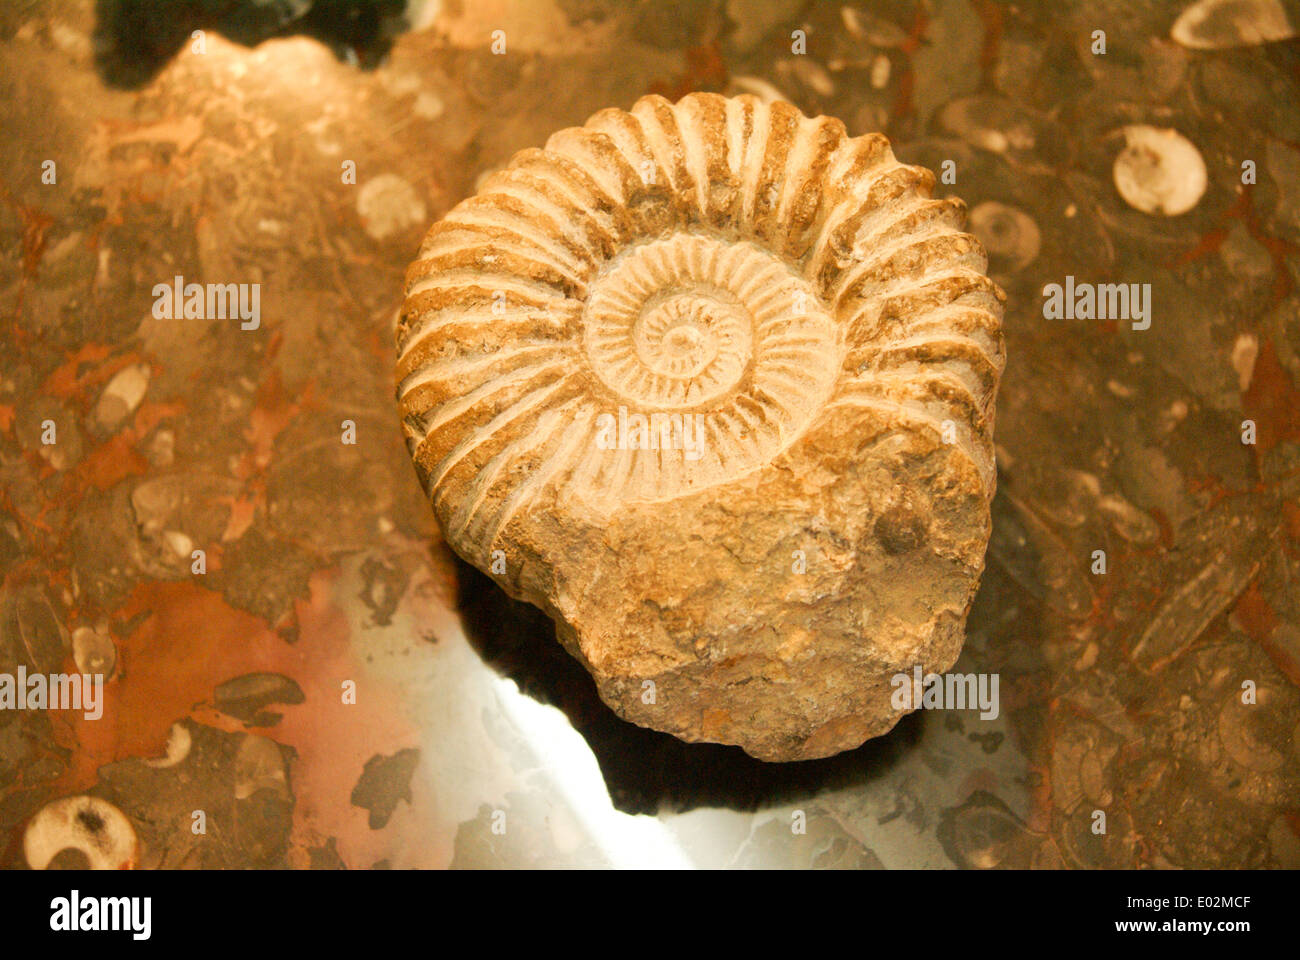 Ammonite fossil stone, close up, found in the Atlas mountains, Morocco. Jurassic period. Photographed in Morocco Stock Photo